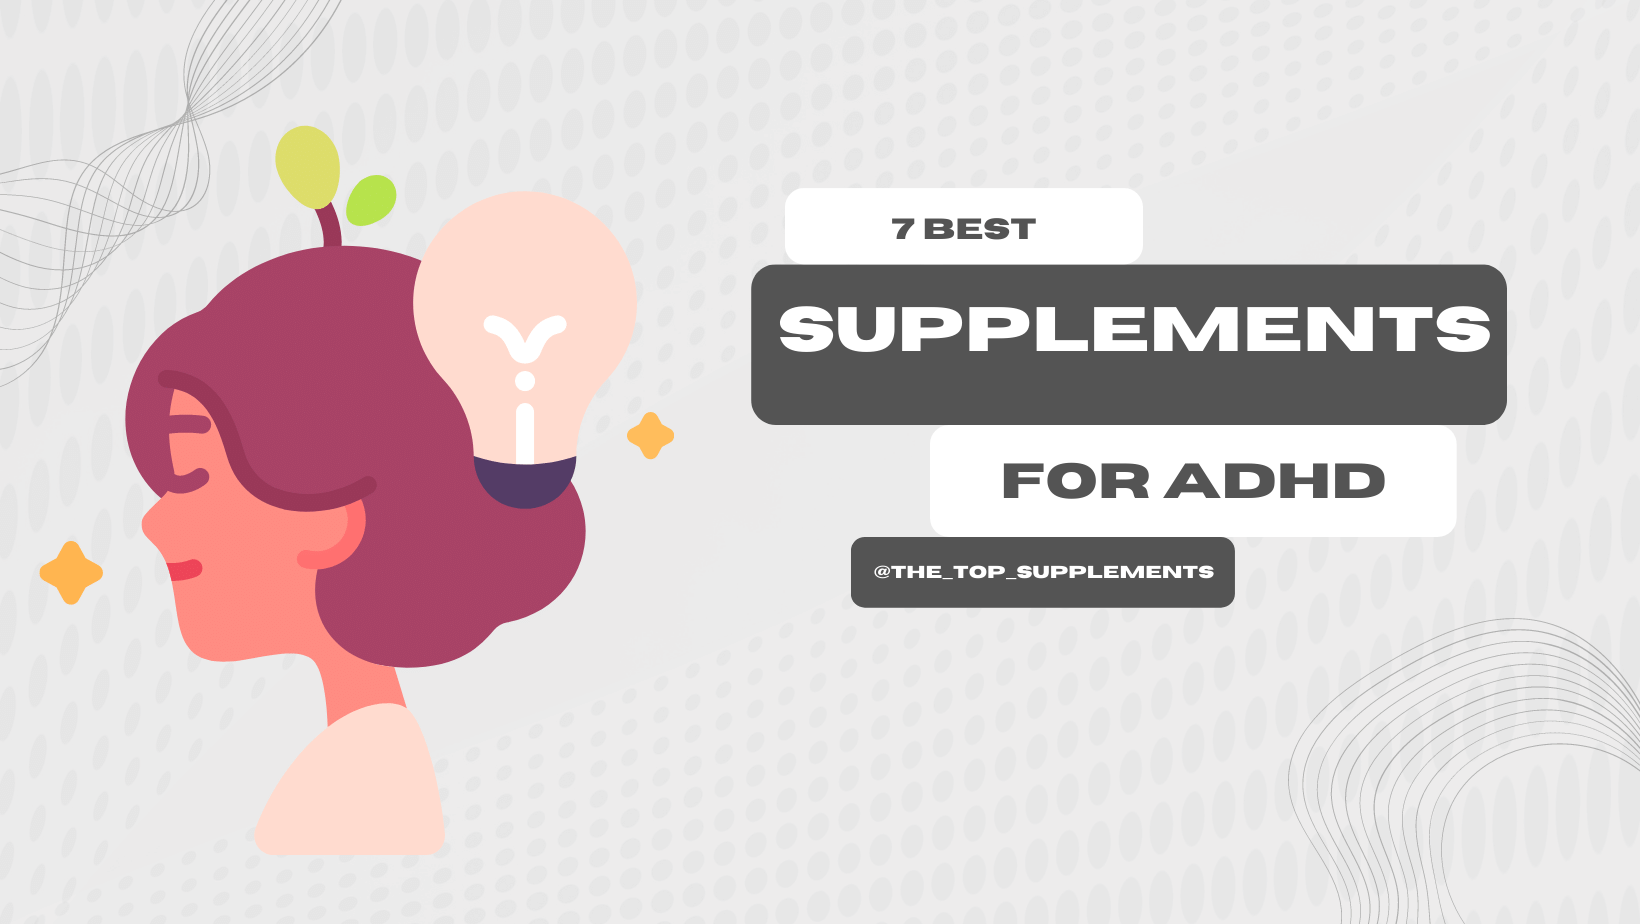 7 Best Supplements for ADHD